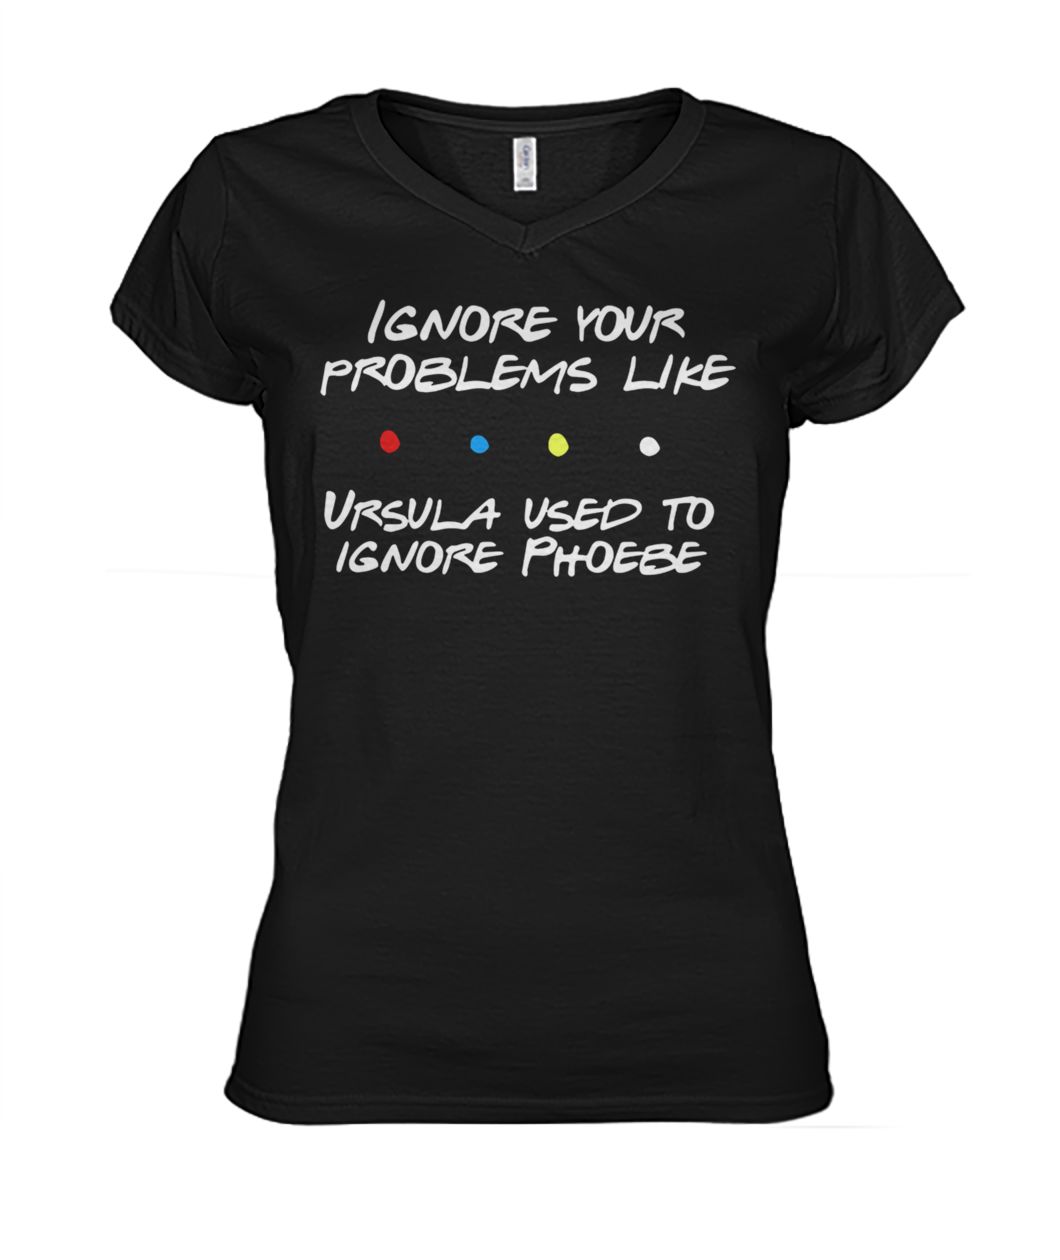 Friends tv show ignore your problems like ursula used to ignore phoebe women's v-neck